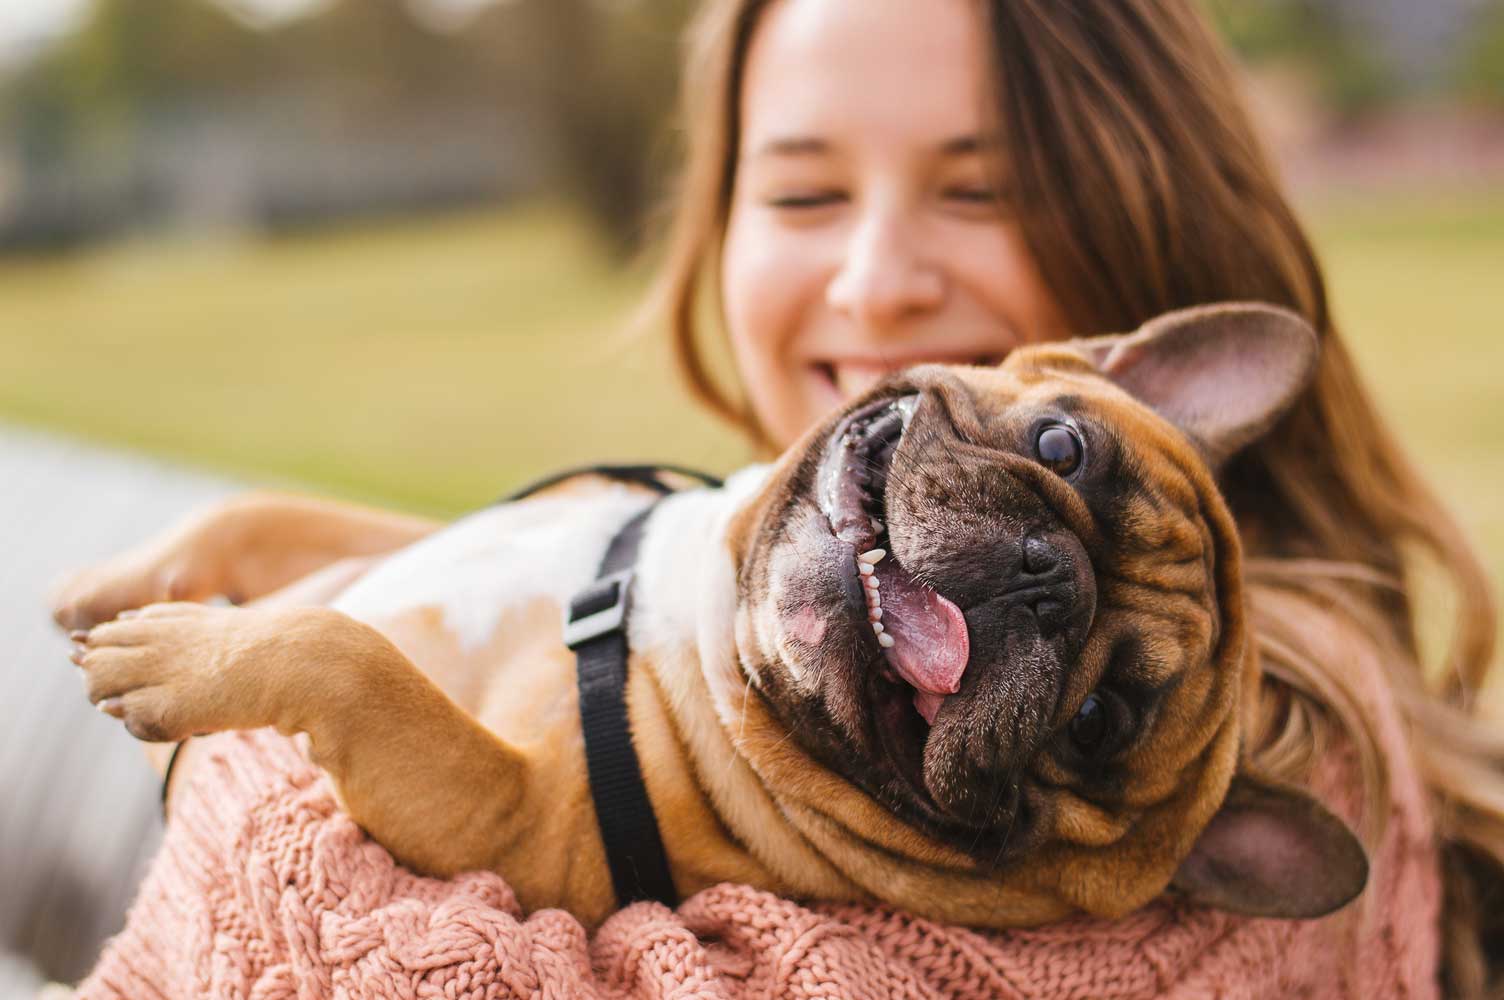 A playful Pug Sticking out his tongue, and his owner happily smiling in the background